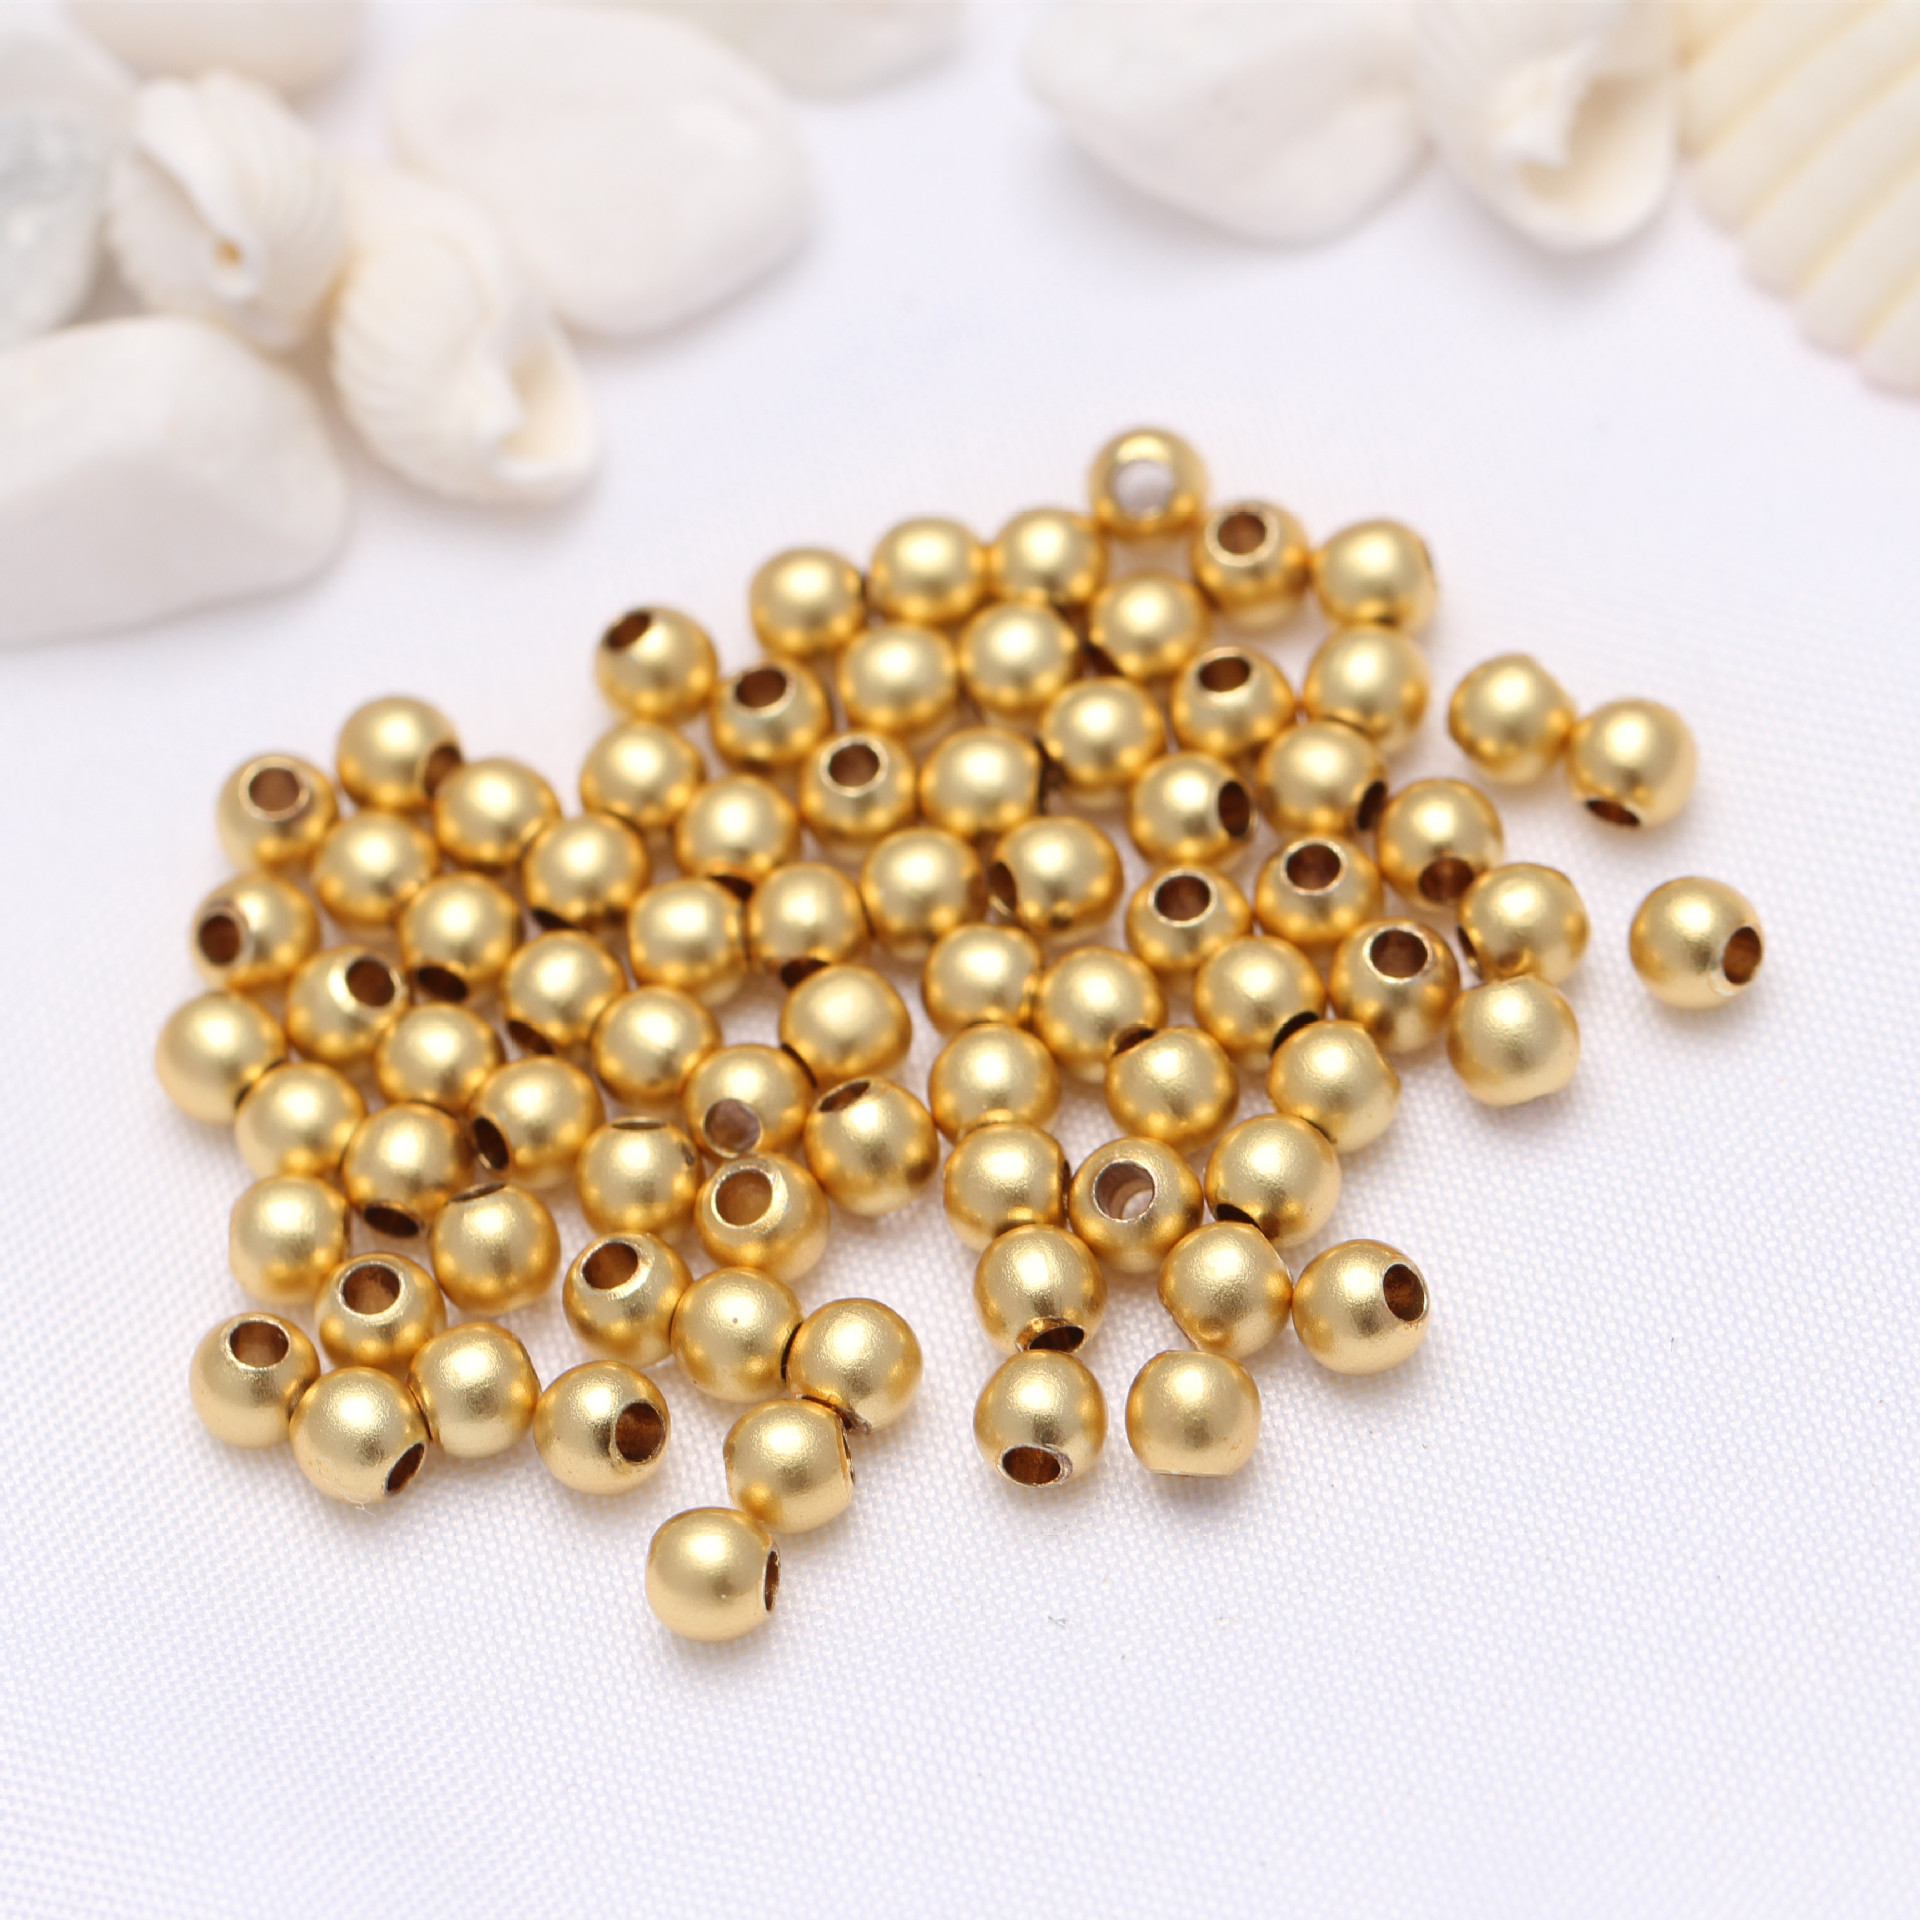 A-82 Color Preserving Sand Gold Loose Bead 6.0mm